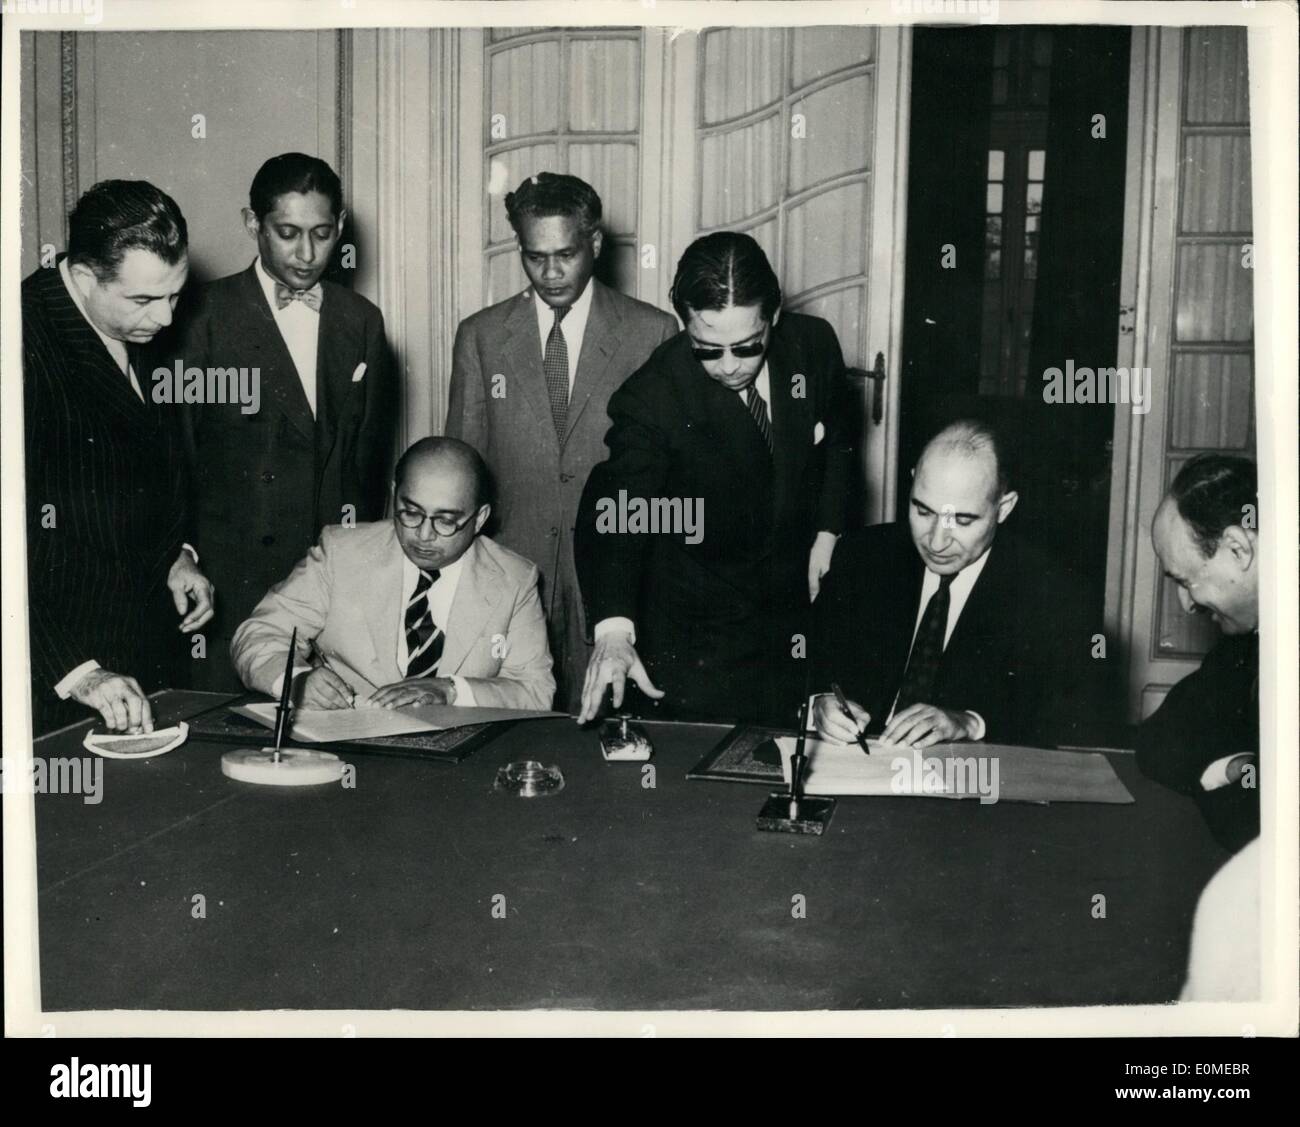 Nov. 11, 1954 - Market for Egyptian cotton textiles pact with Ceylon is signed.: For the first time a trade and payments agreement has been concluded between Egypt and Ceylon. It was signed at the Ministry of Foreign Affaires by Dr. Mahmoud Fawzi, Egyptian Minister of Foreign Affaires on behalf of the Egyptian Government and Shirley Coria, Minister of Commerce, Trade and Fisheries, on behalf of the Government of Ceylon. Photo shows Dr. Mahmoud Fawzi and Mr. Shirley Coria signing the agreement. Stock Photo